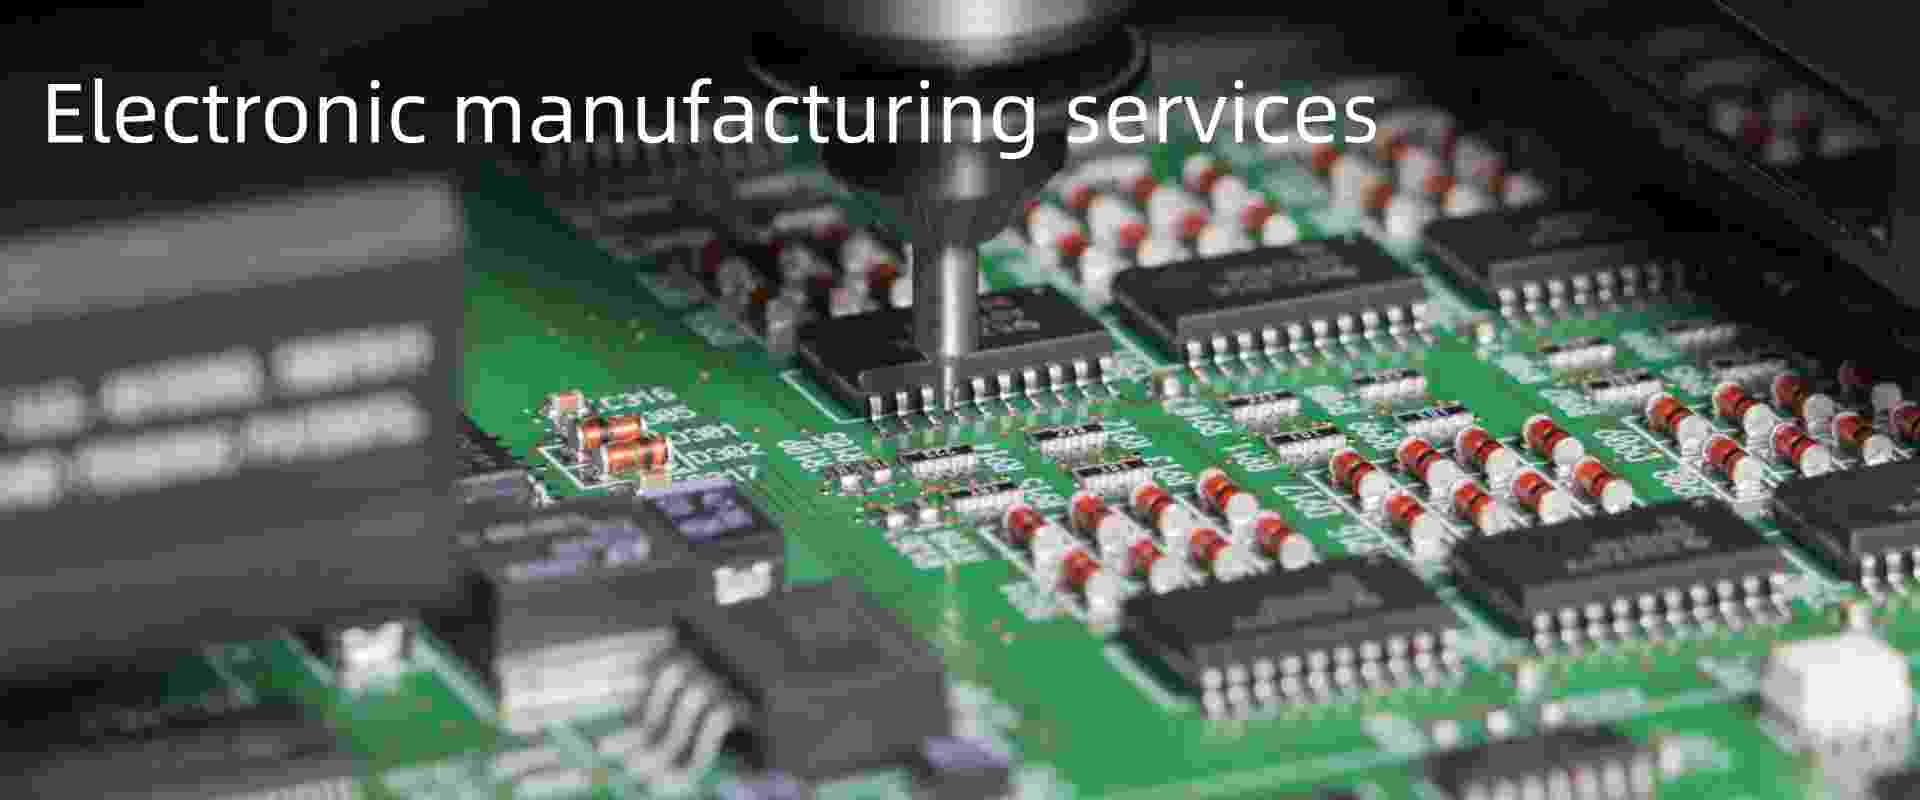 Electronic manufacturing services